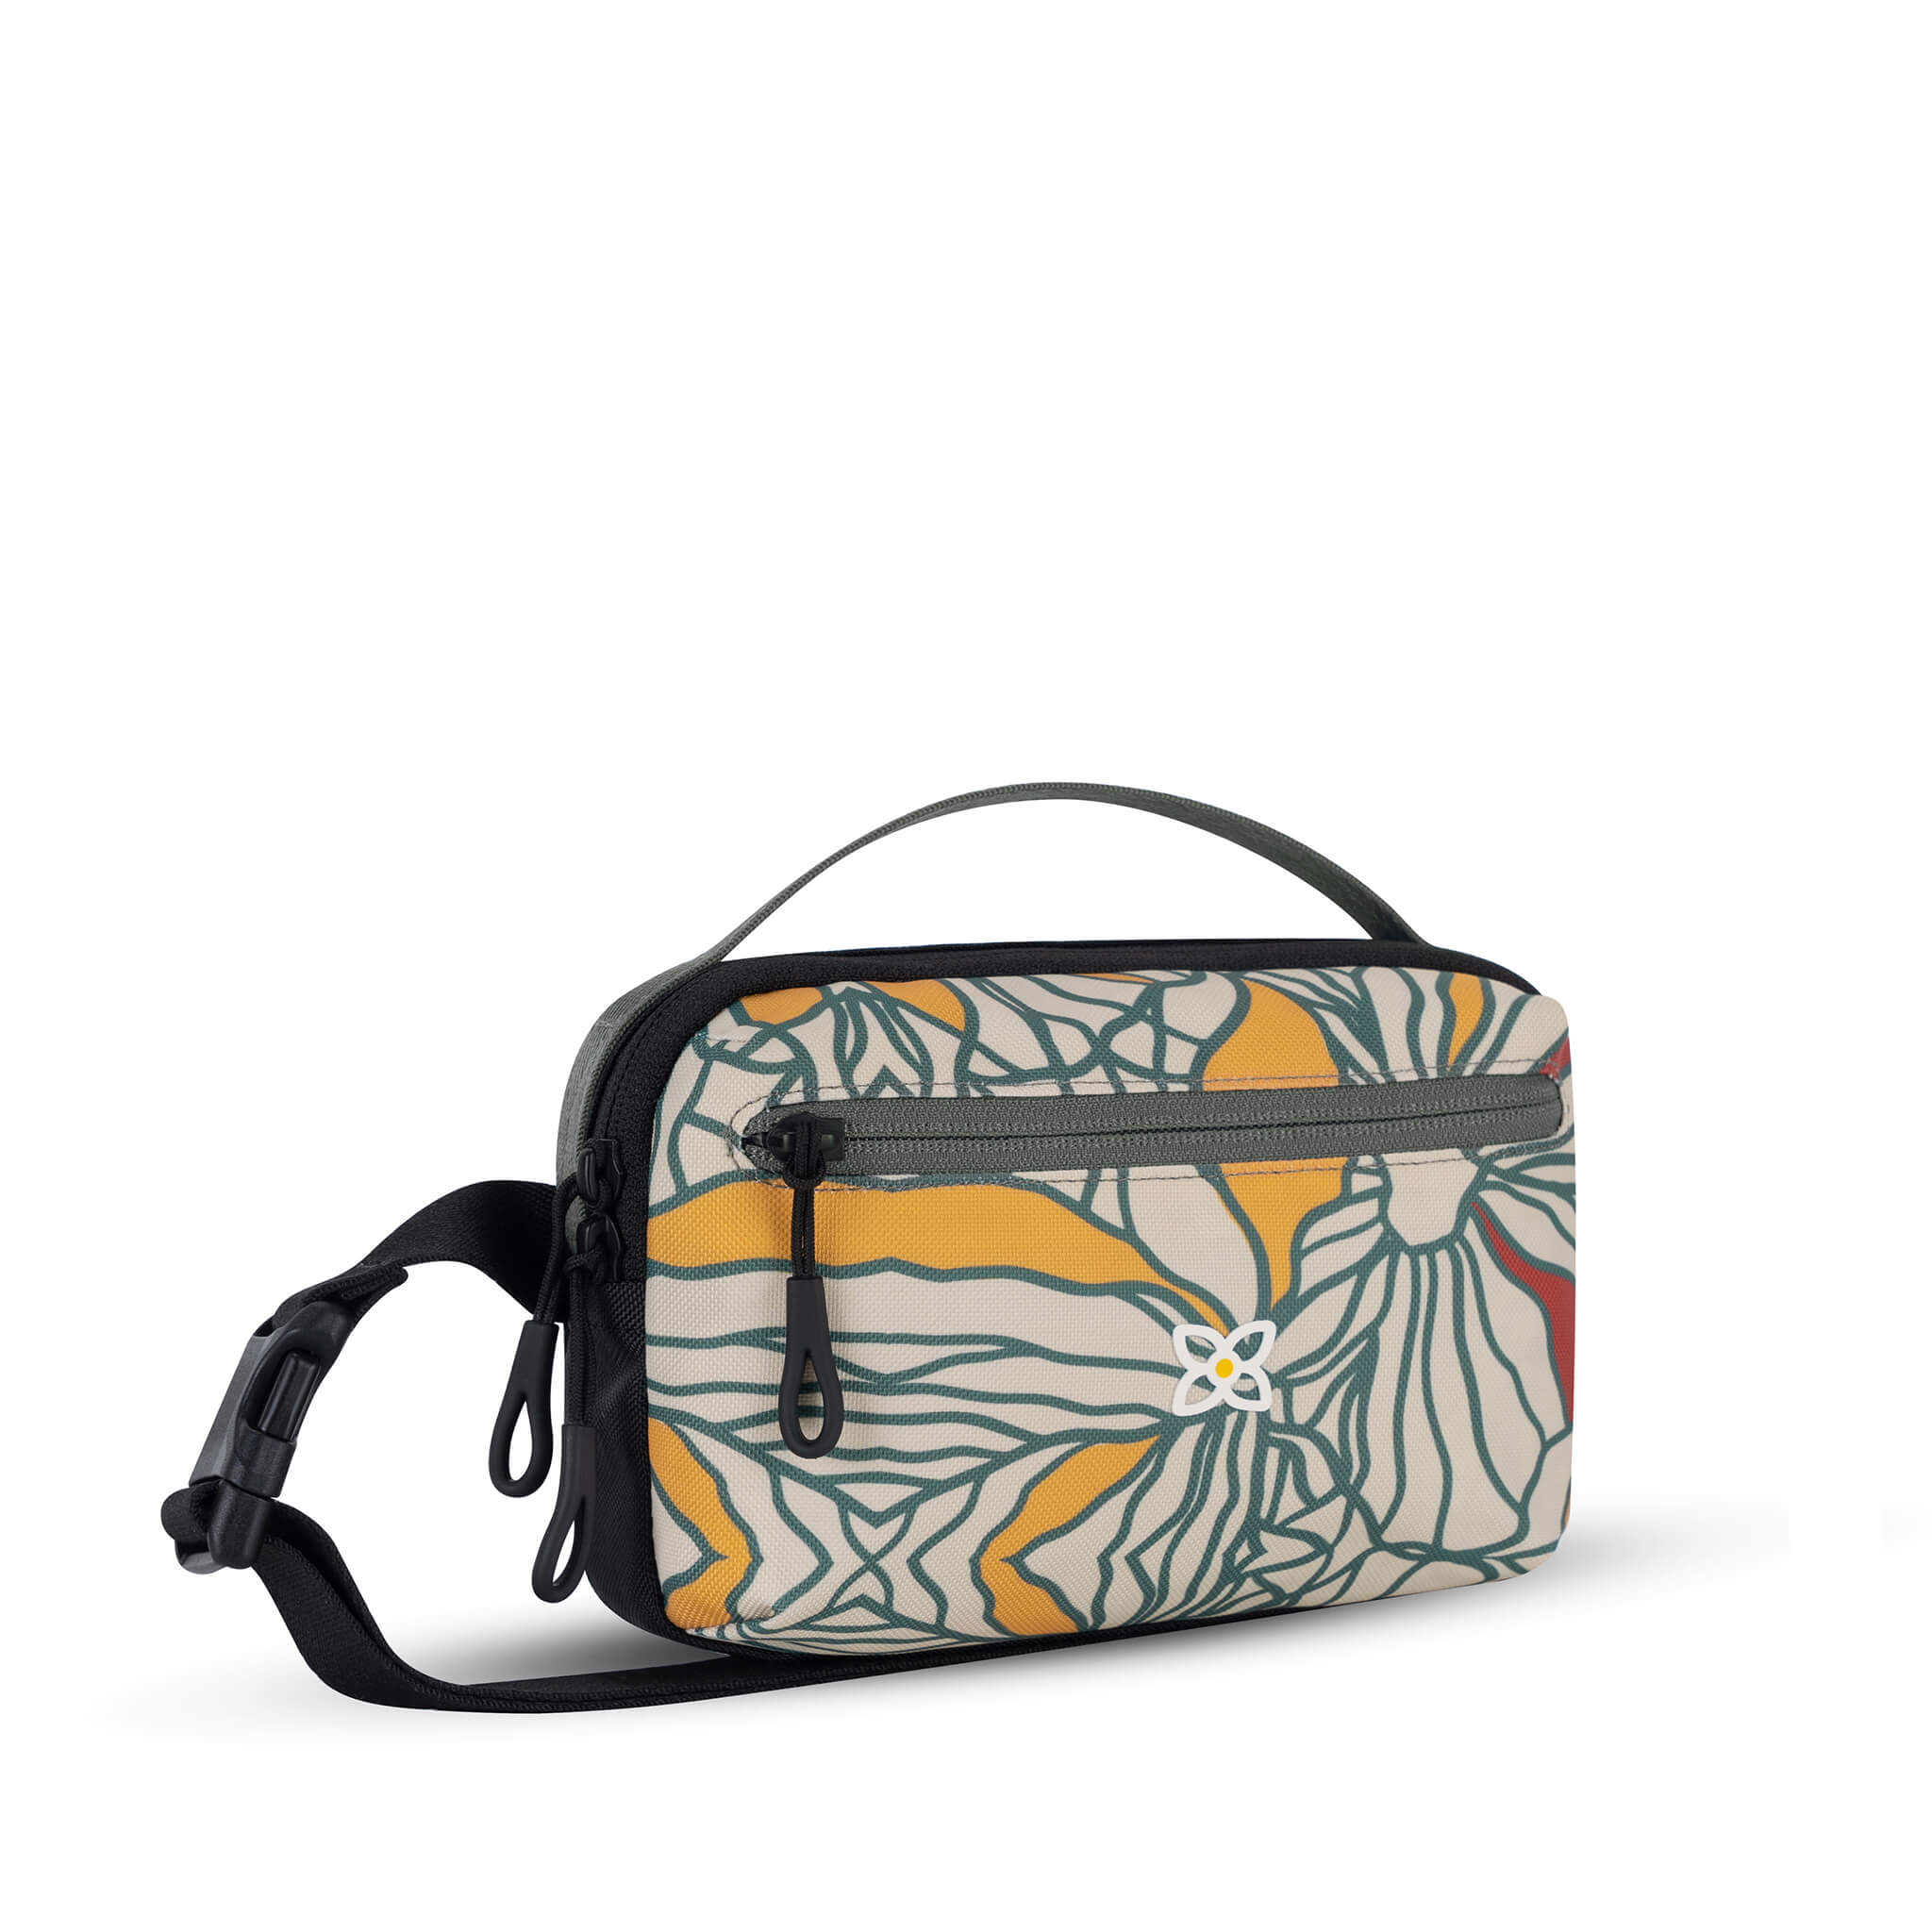 Angled front view of Sherpani hip pack, the Hyk in Fiori. Hyk features include an adjustable waist strap, two external zipper pockets, an internal zipper pocket and RFID-blocking technology to block cyber theft. The Fiori colorway is a floral pattern with red accents.